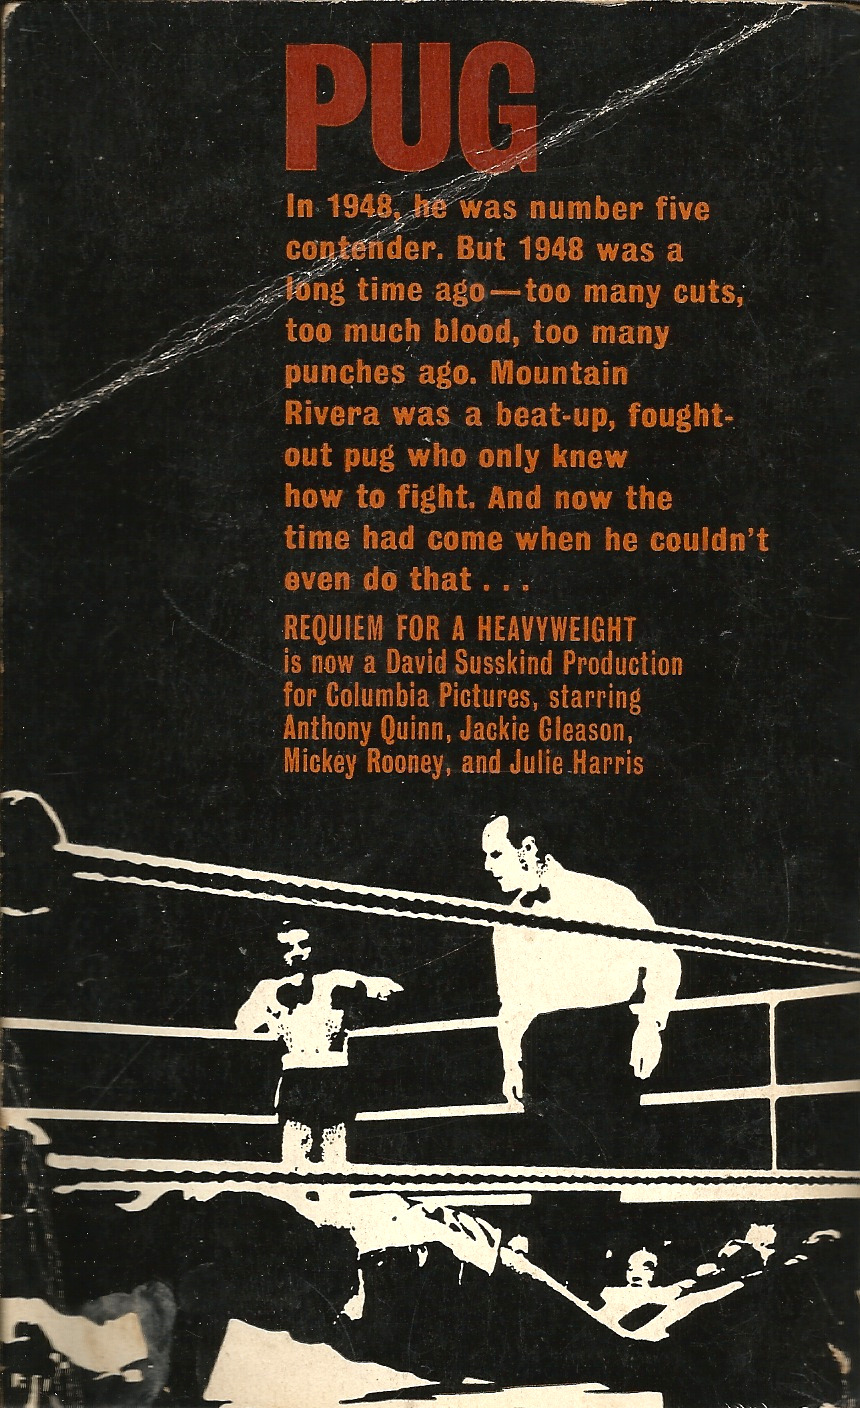 Requiem For A Heavyweight, by Rod Serling (Corgi, 1962)  Excerpt from &lsquo;Foreward